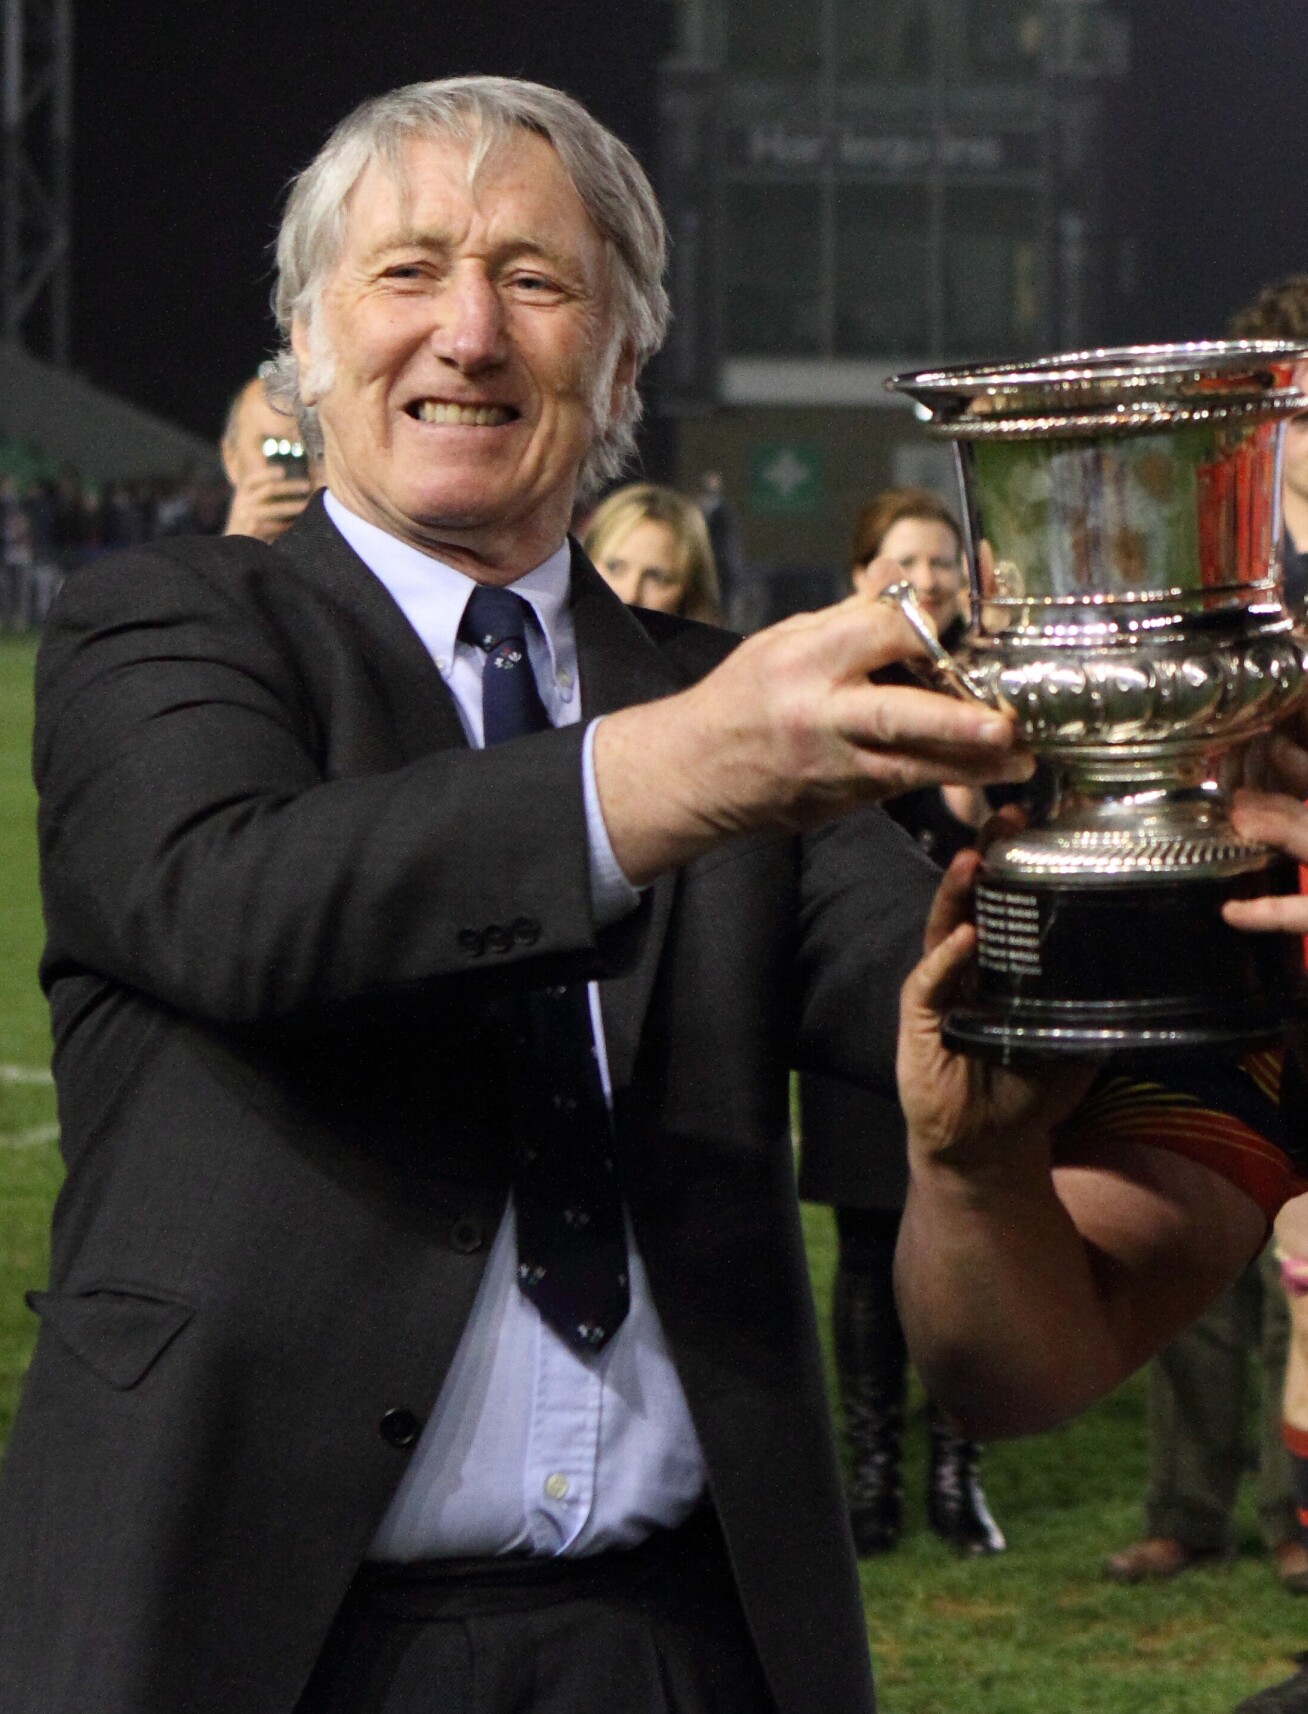 JPR Williams presents the cup at the 2014 JPR Williams Cup match, part of the Imperial Varsity fixtures